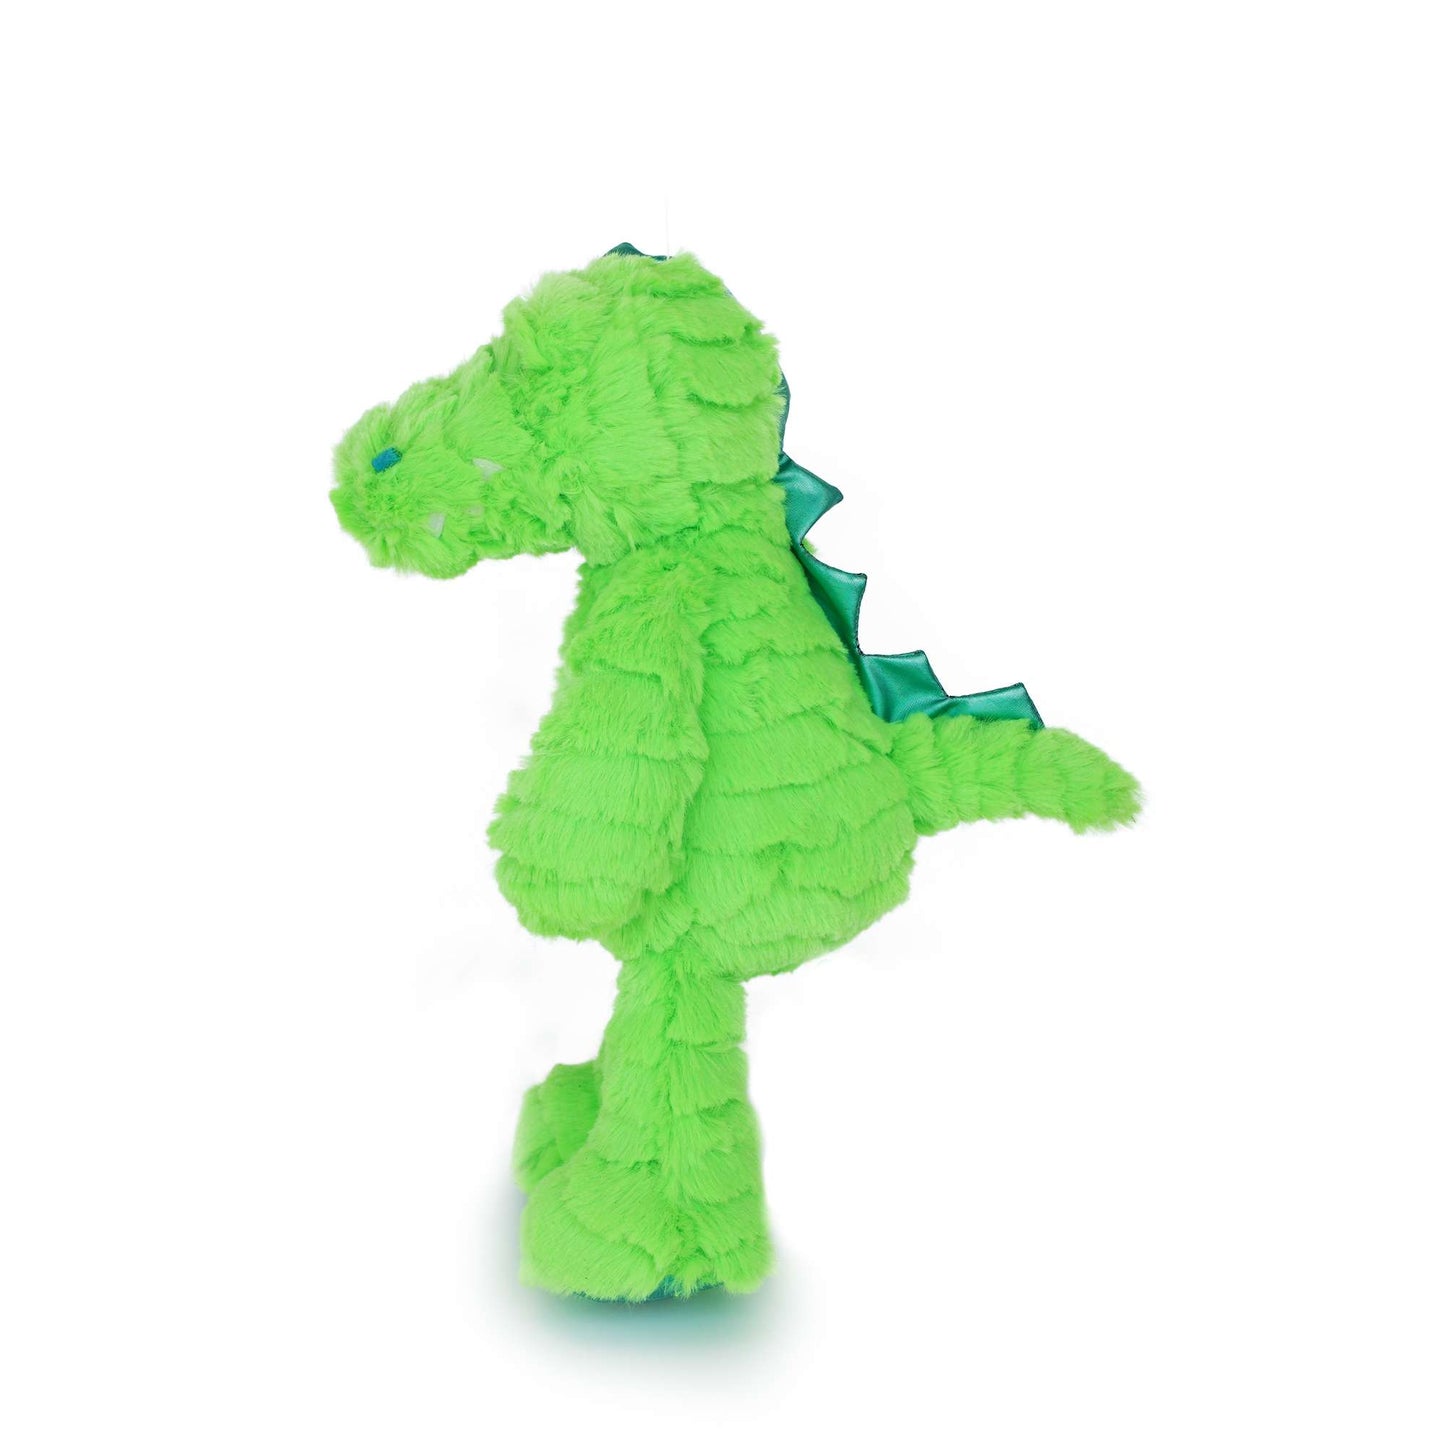 side view green fluffy alligator stuffed animal PlushThis